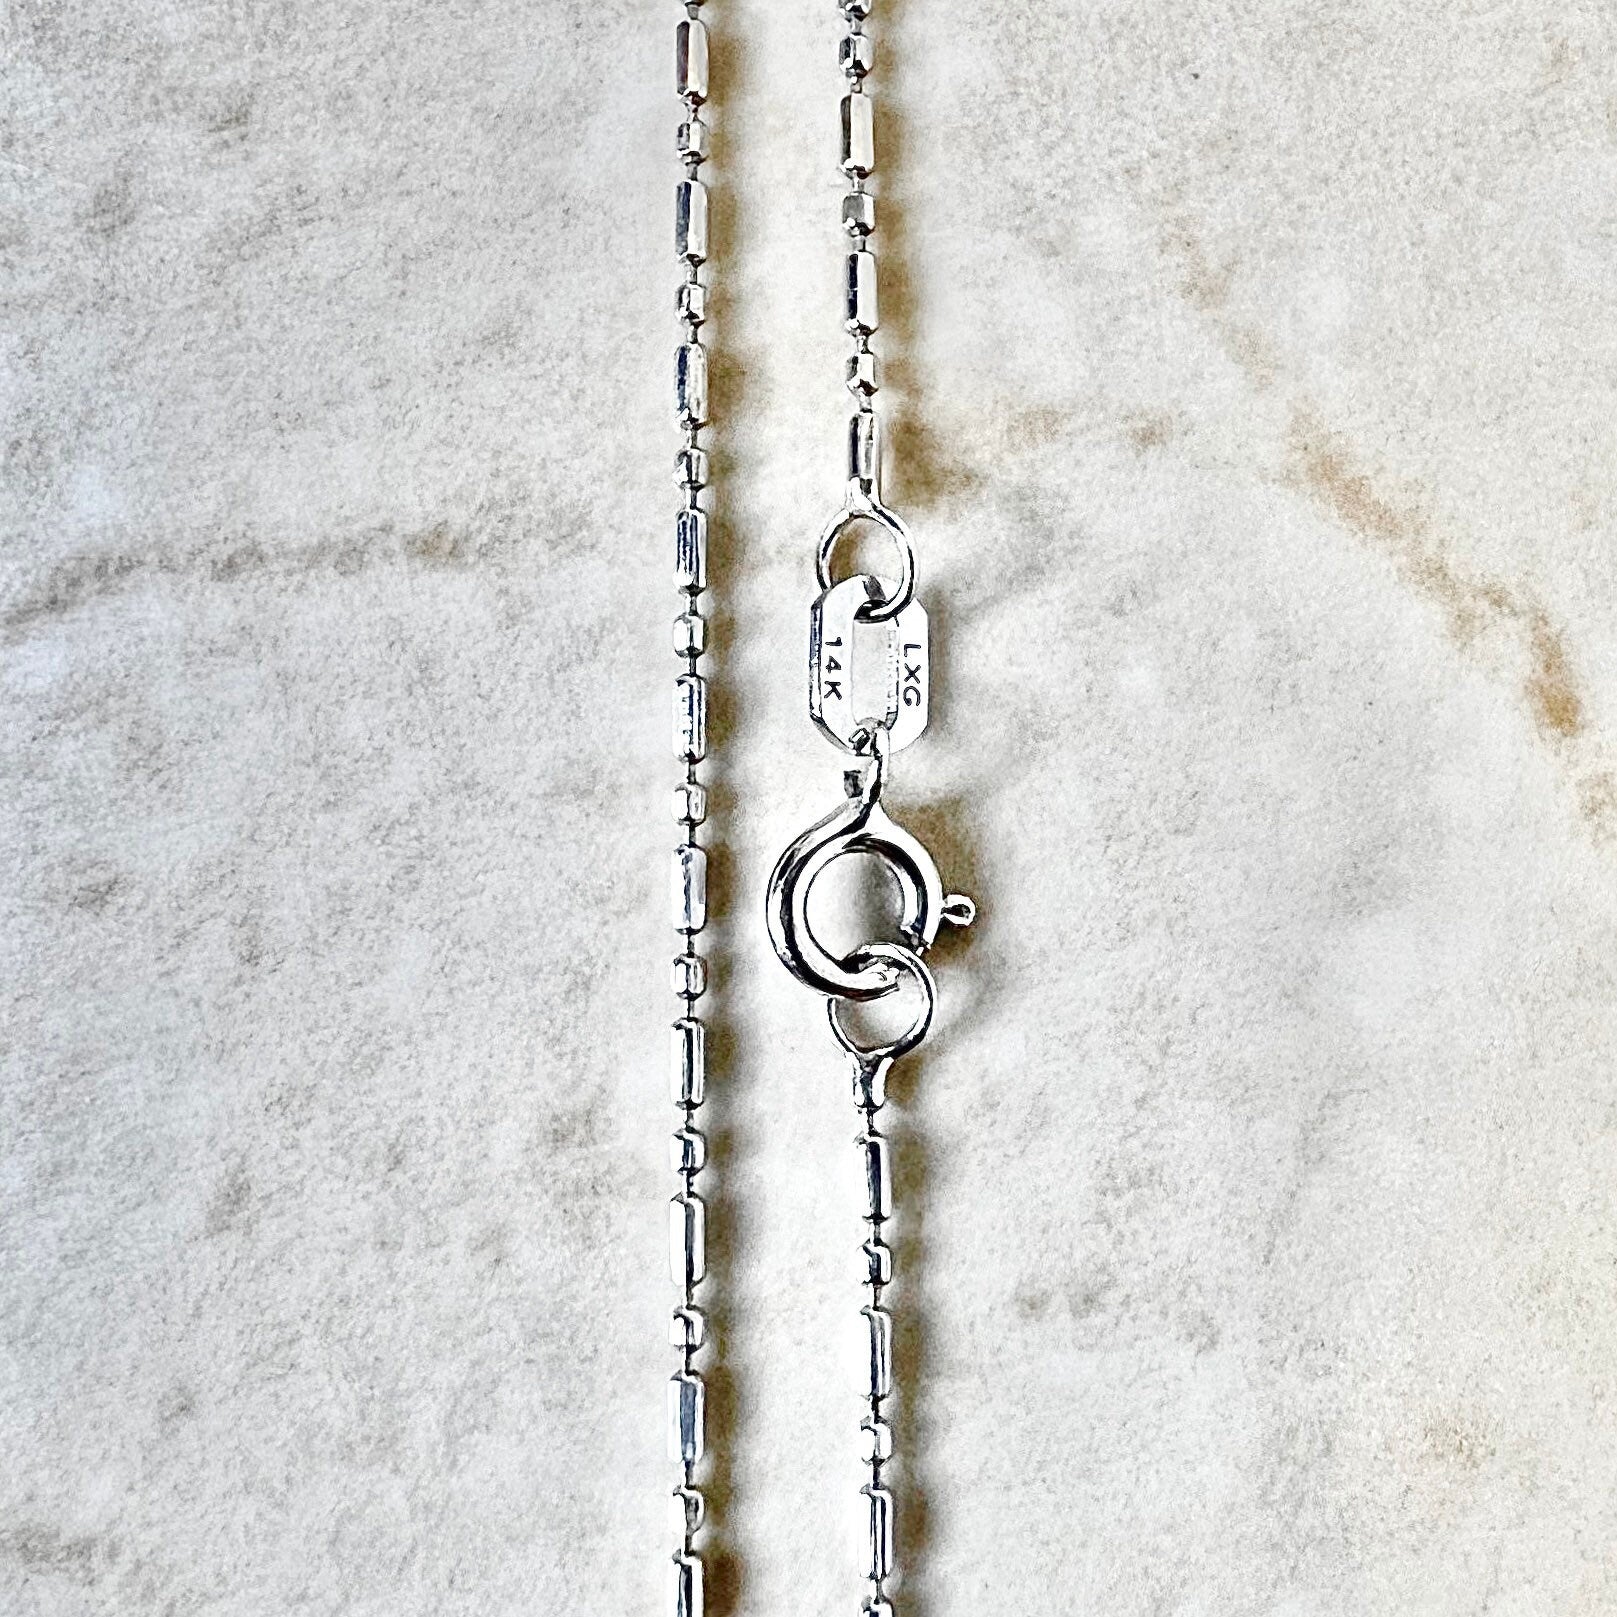 Vintage 14K White Gold Bar & Bead Chain - 18” Gold Chain - White Gold Pendant Necklace - Birthday Gift For Her - Holiday Gift